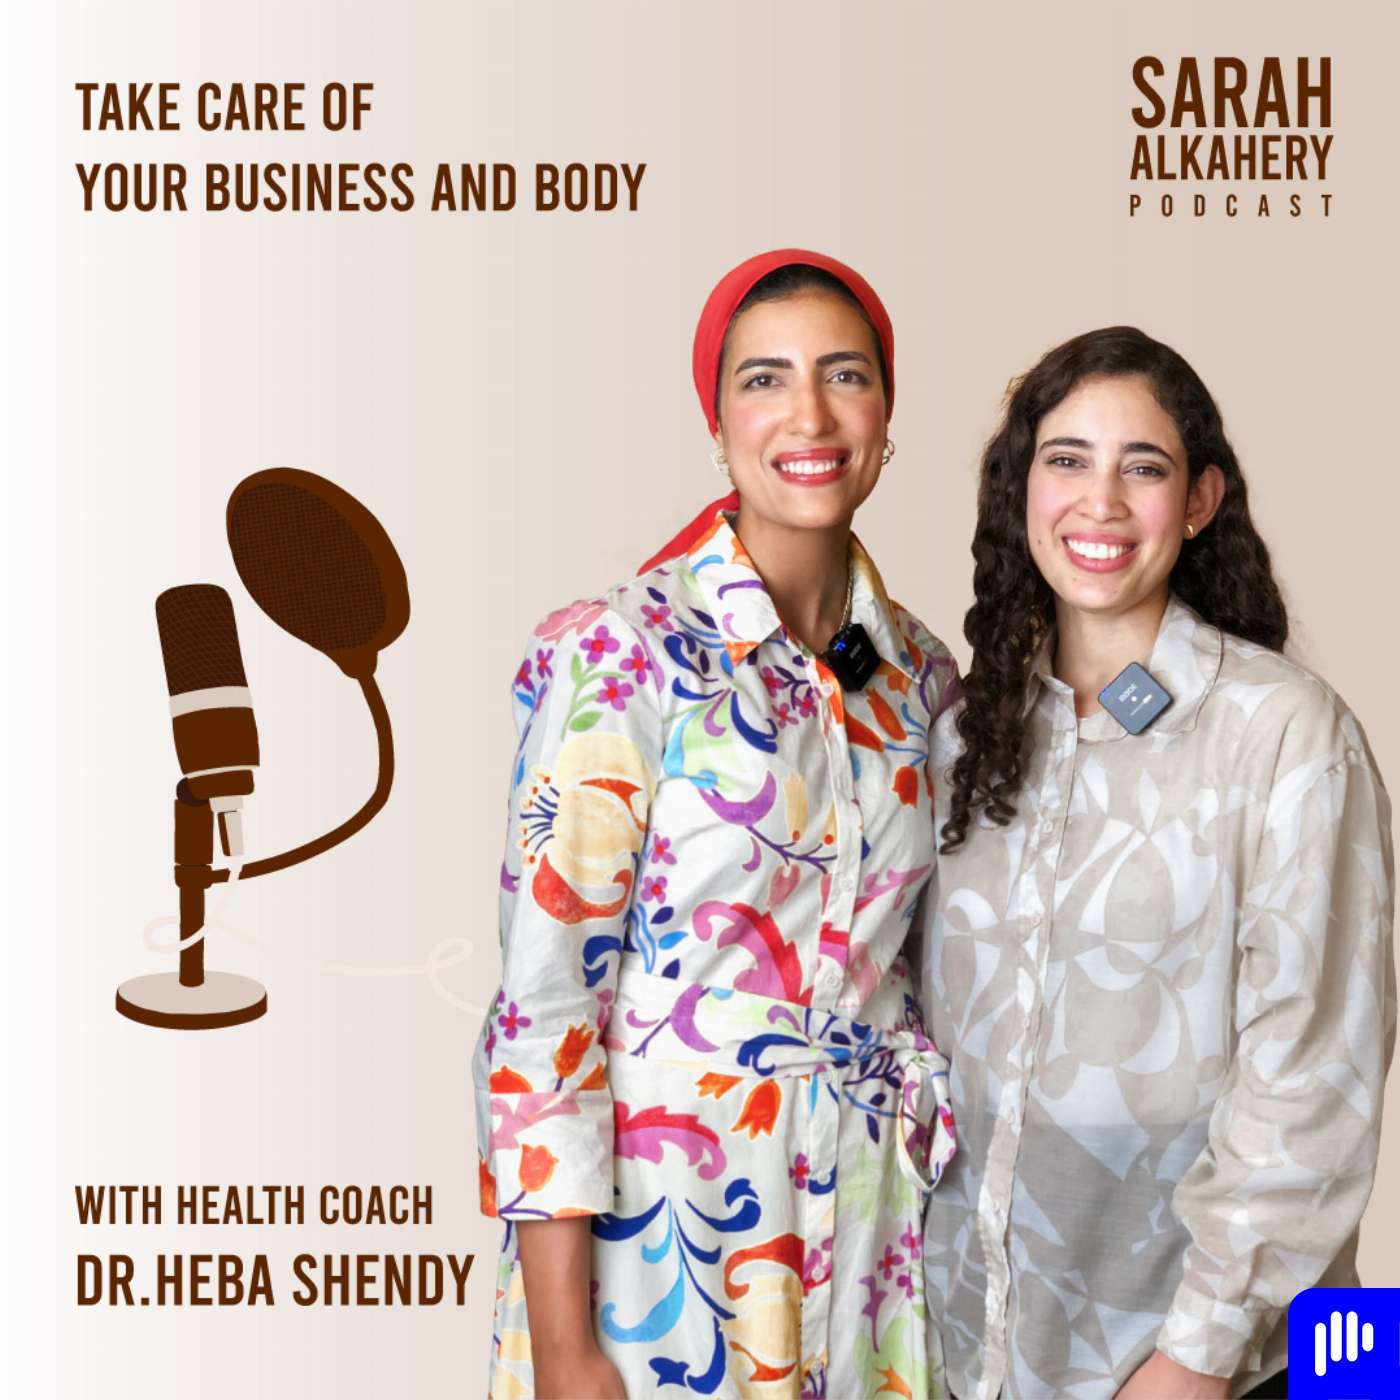 Your business is your health with Heba Shendy & Sarah Alkahery